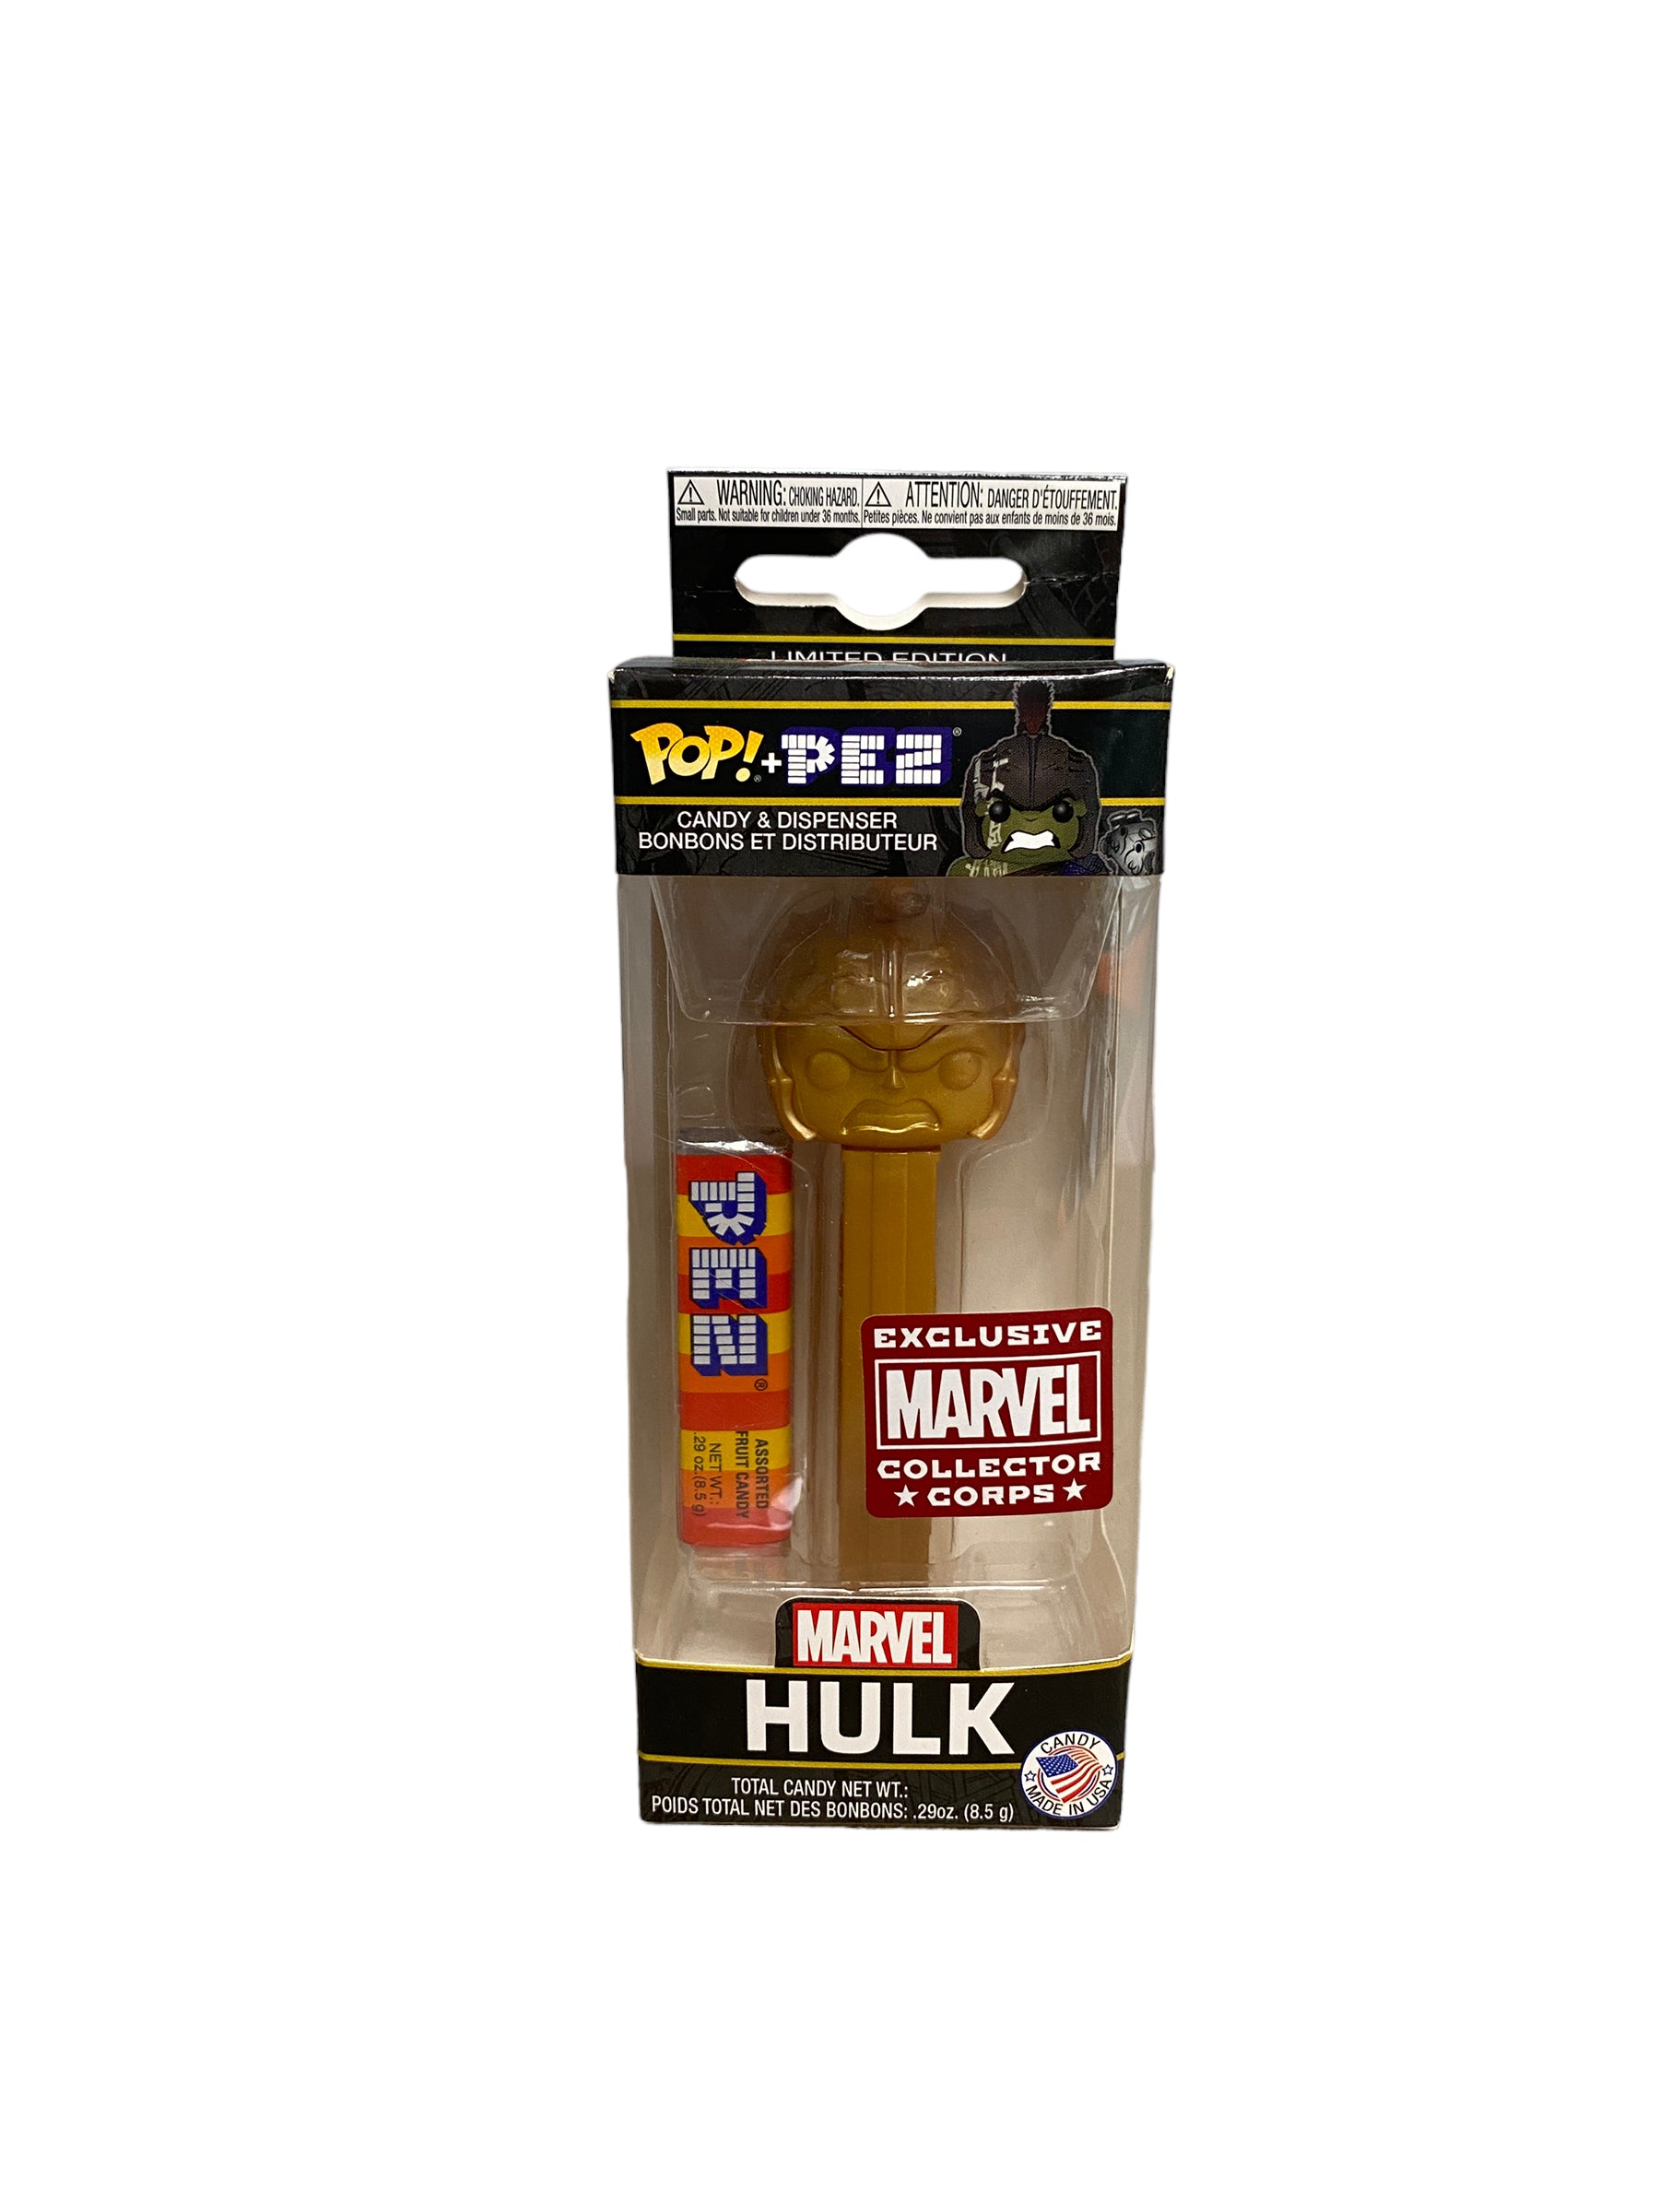 Hulk (Gold) Funko Pop Pez! - Marvel - Marvel Collector Corps Exclusive - Condition 8.75/10